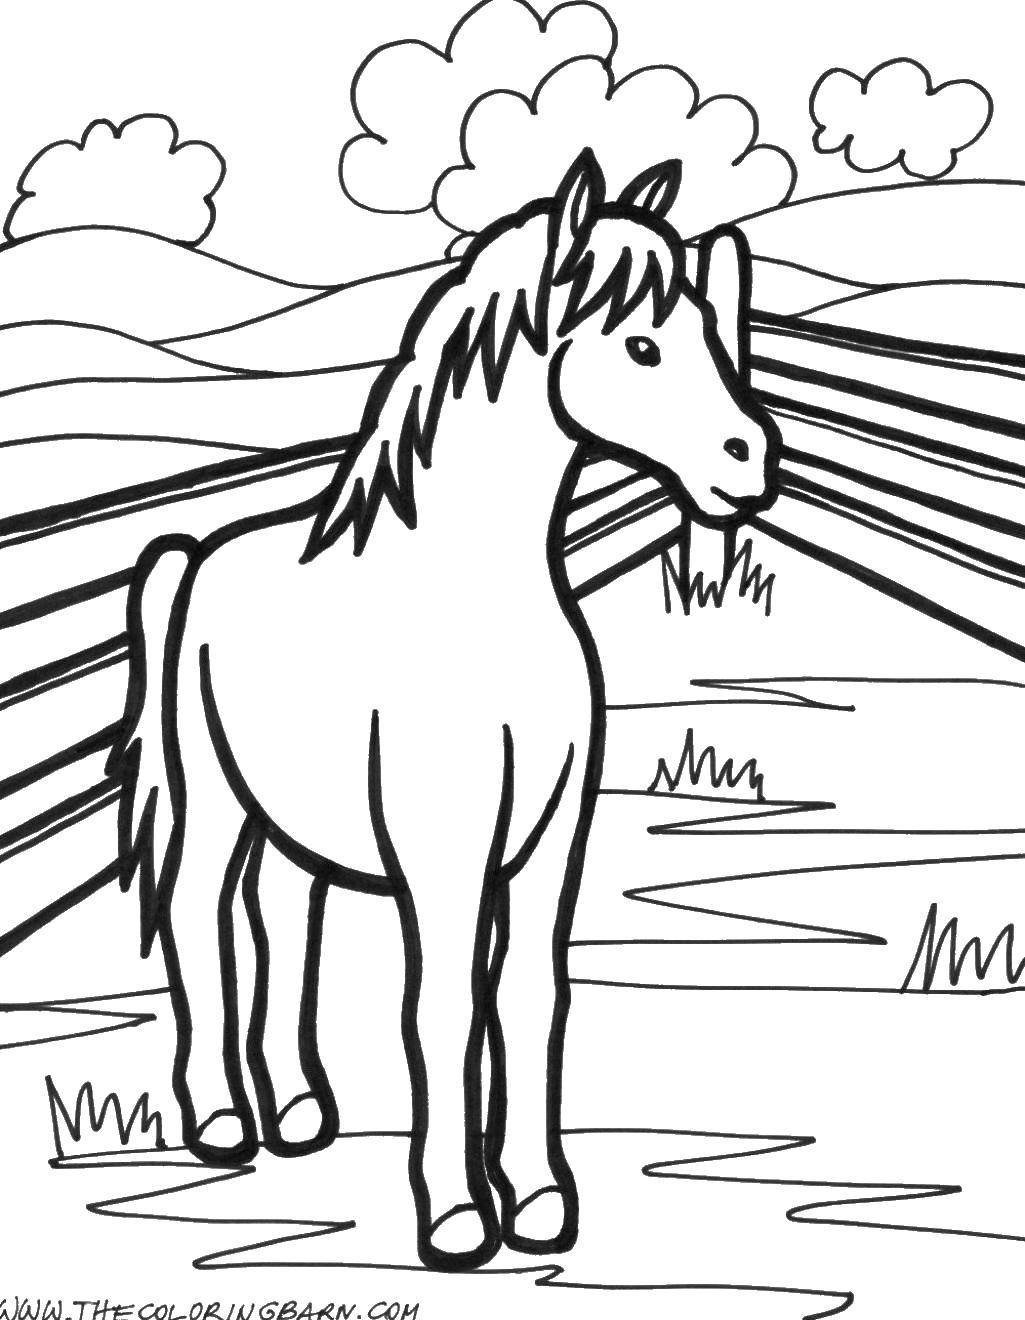 Coloring The corral with a horse. Category animals. Tags:  Animals, horse.